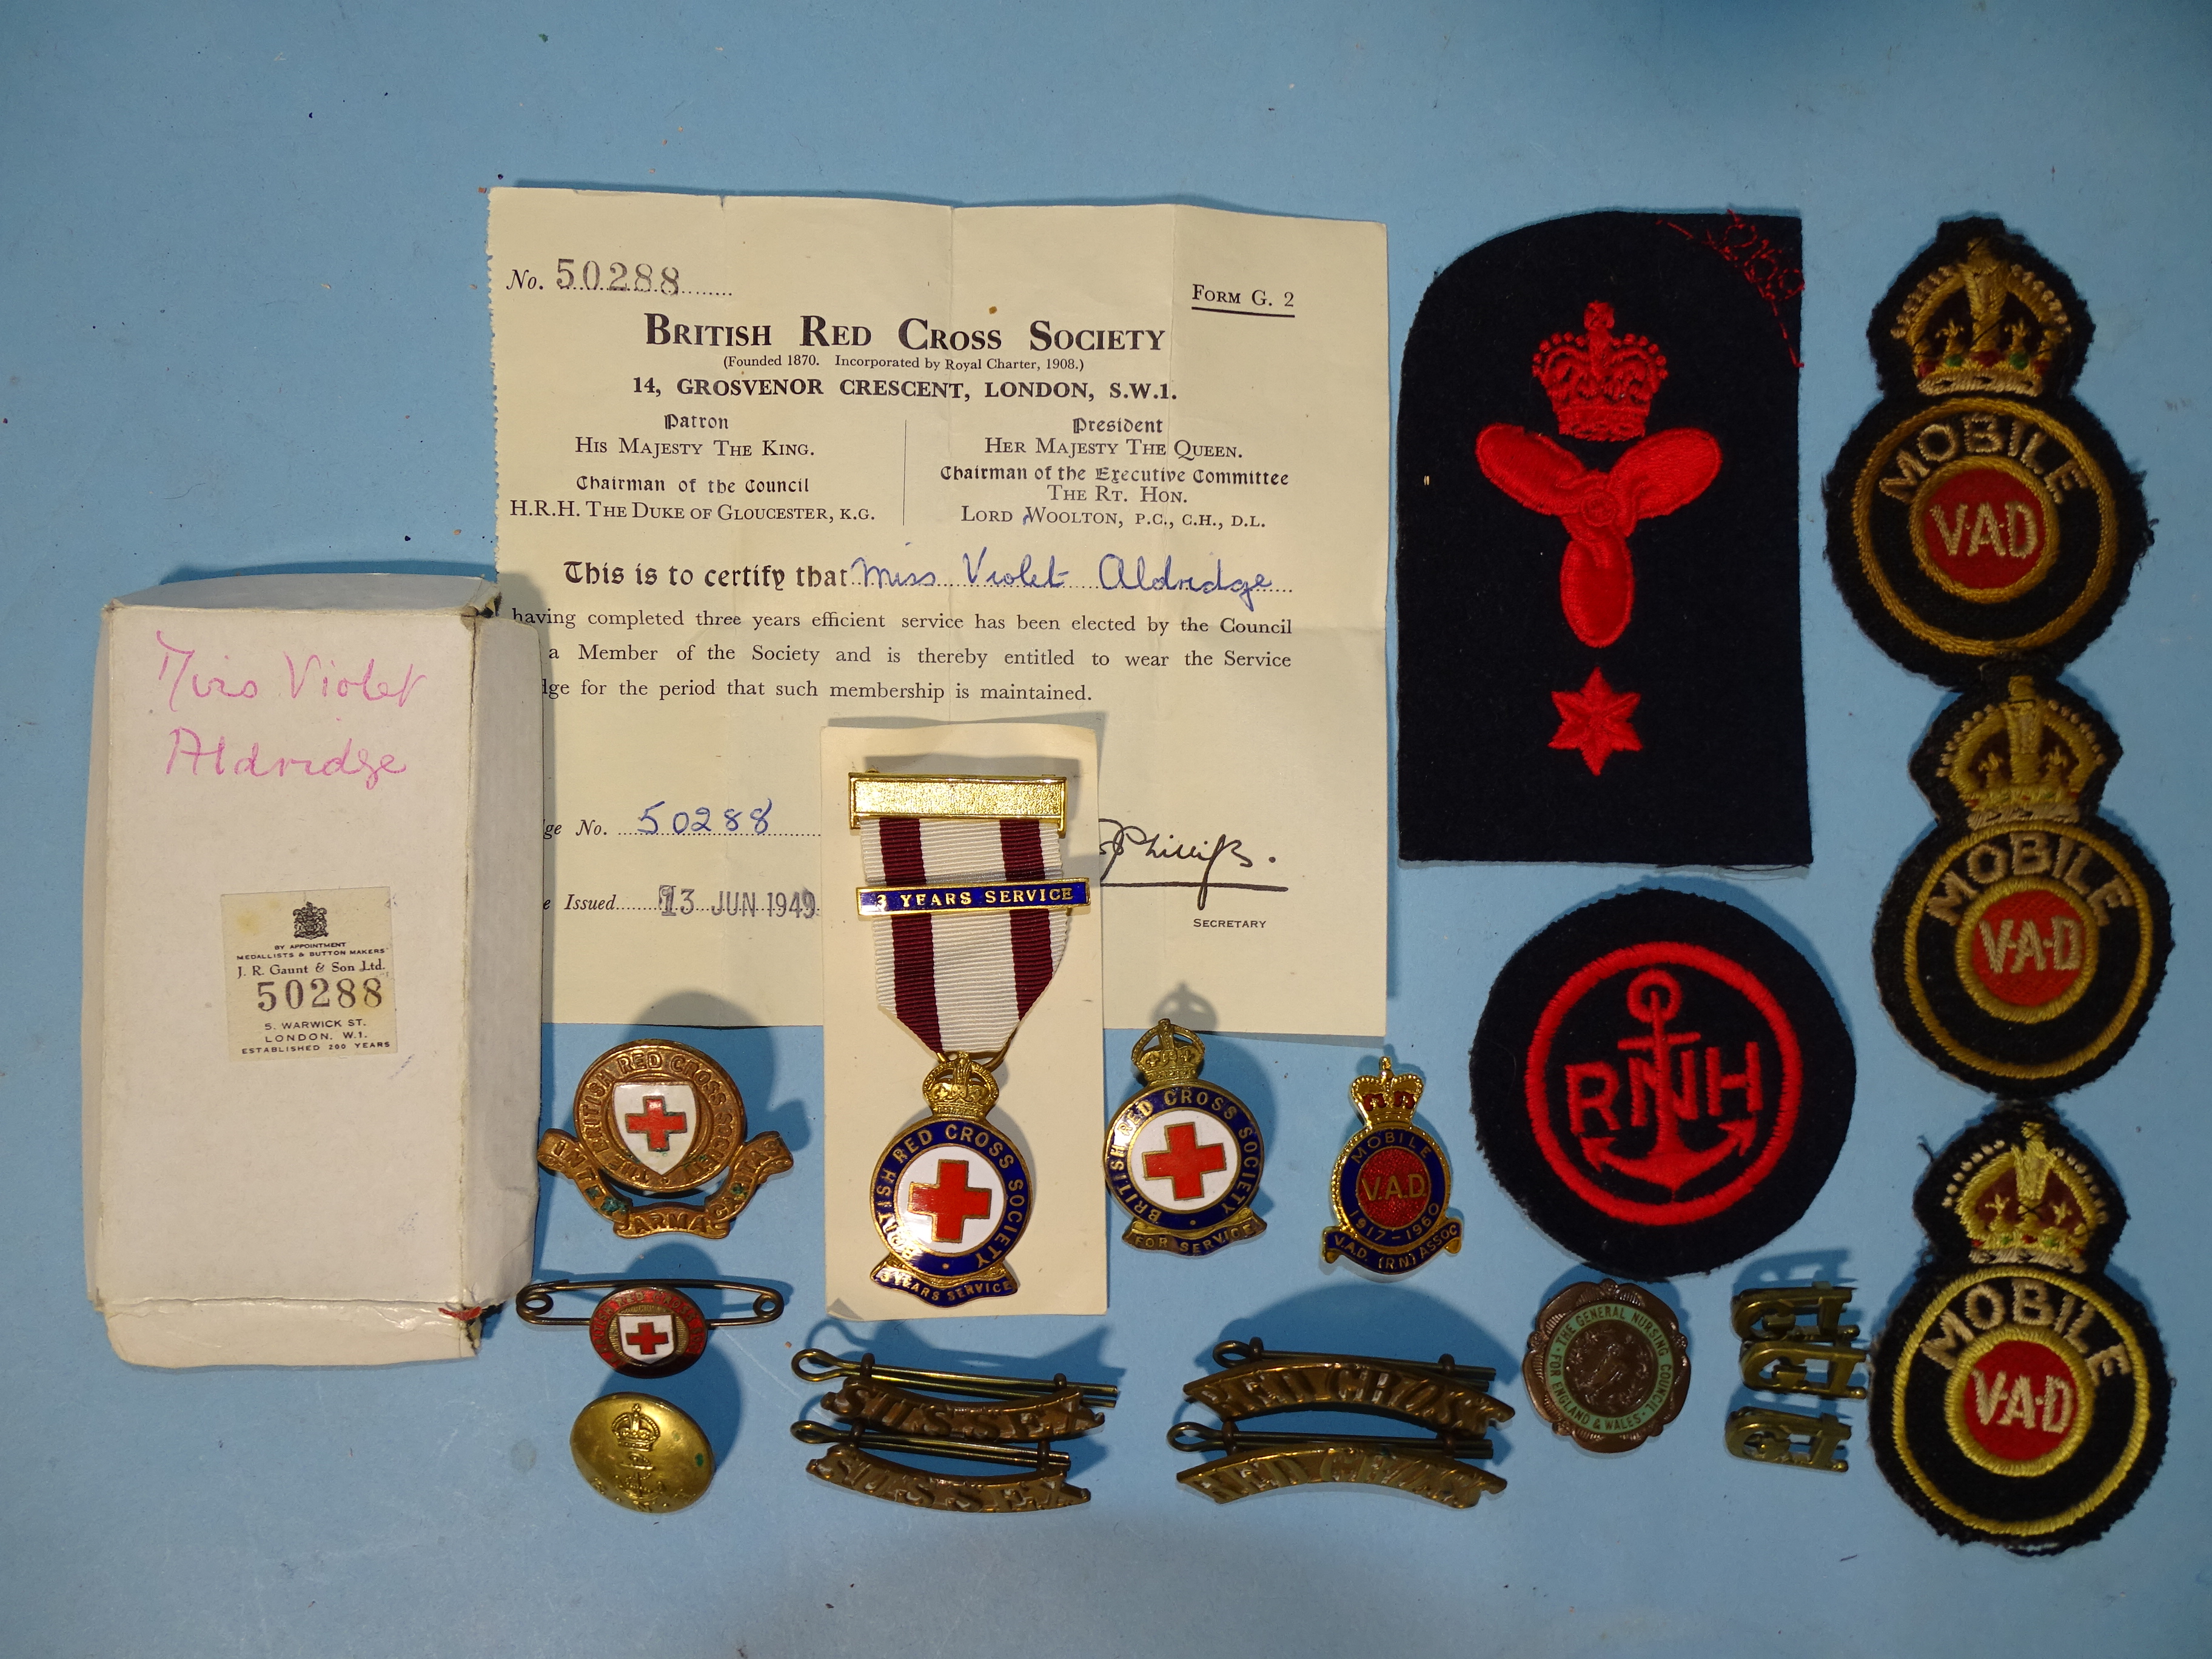 A British Red Cross Society three years service medallion and various metal and cloth badges for VAD